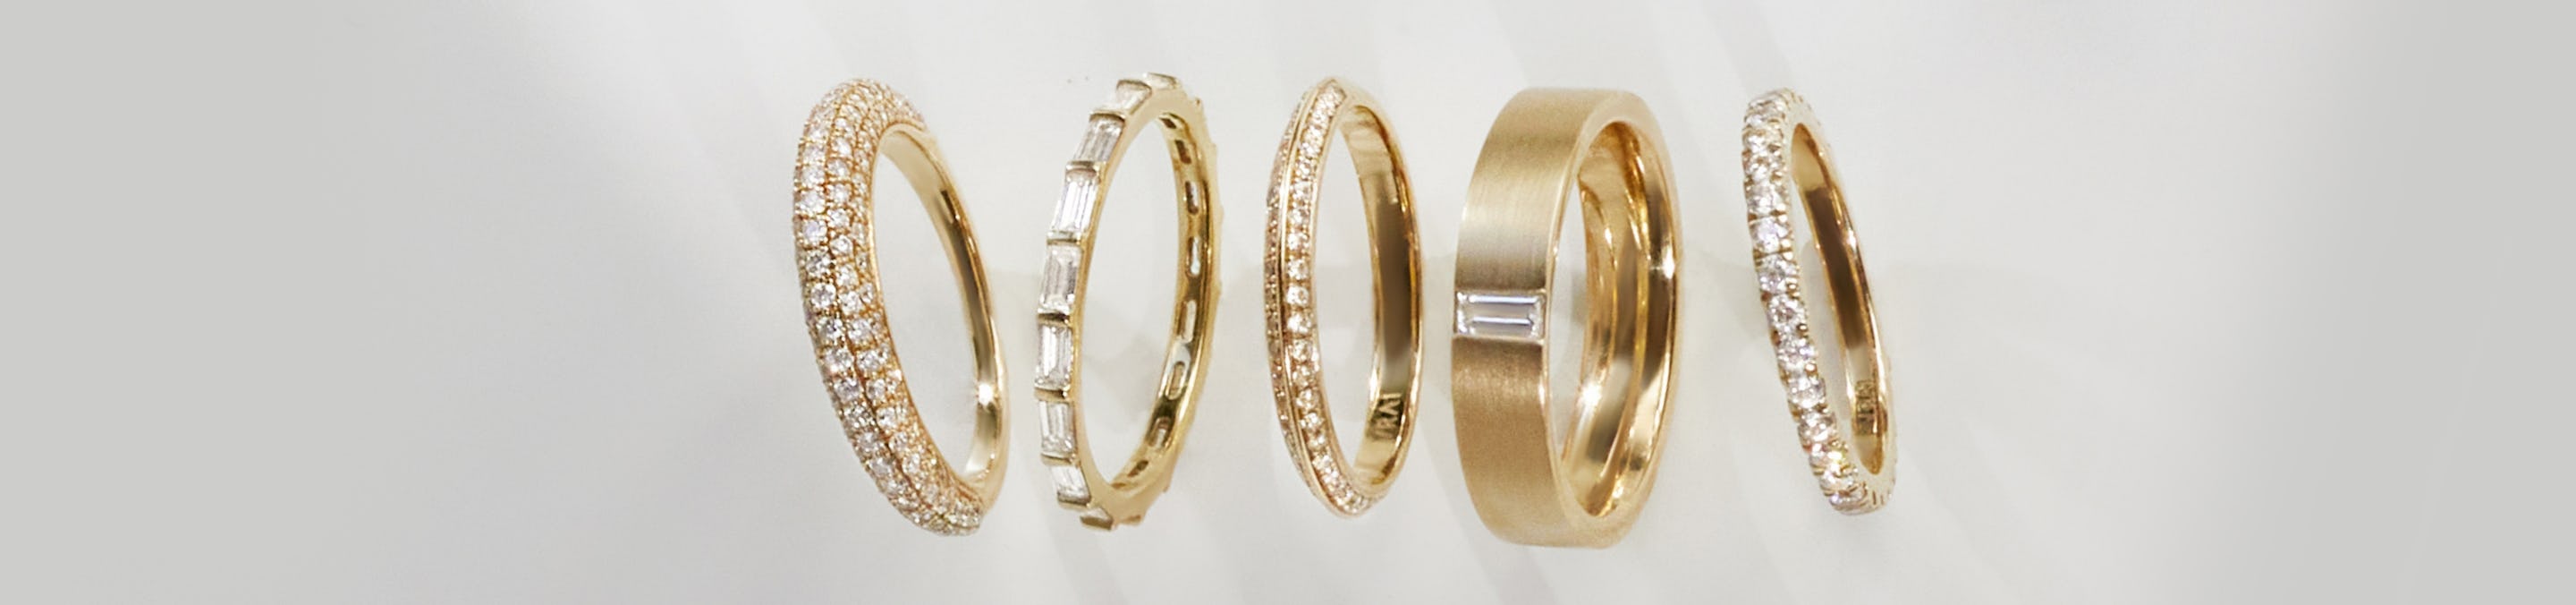 Five different types of rings including pave ring, signet ring and more